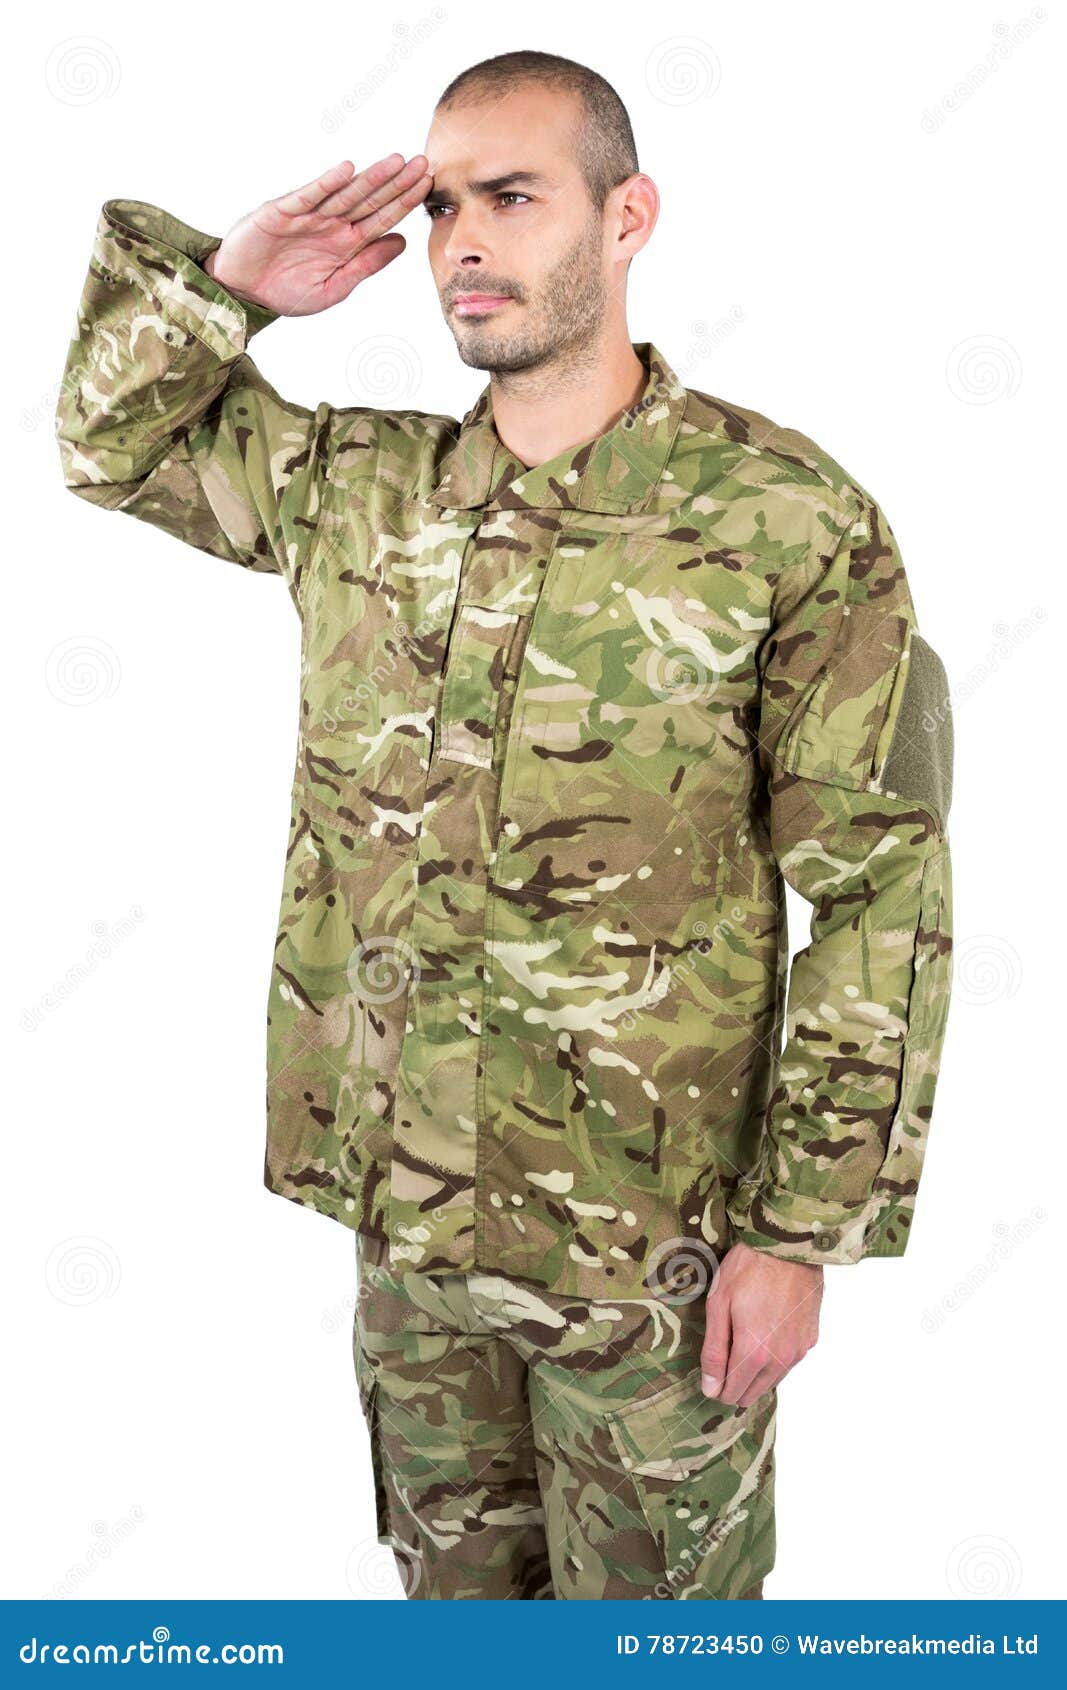 soldier giving a salute